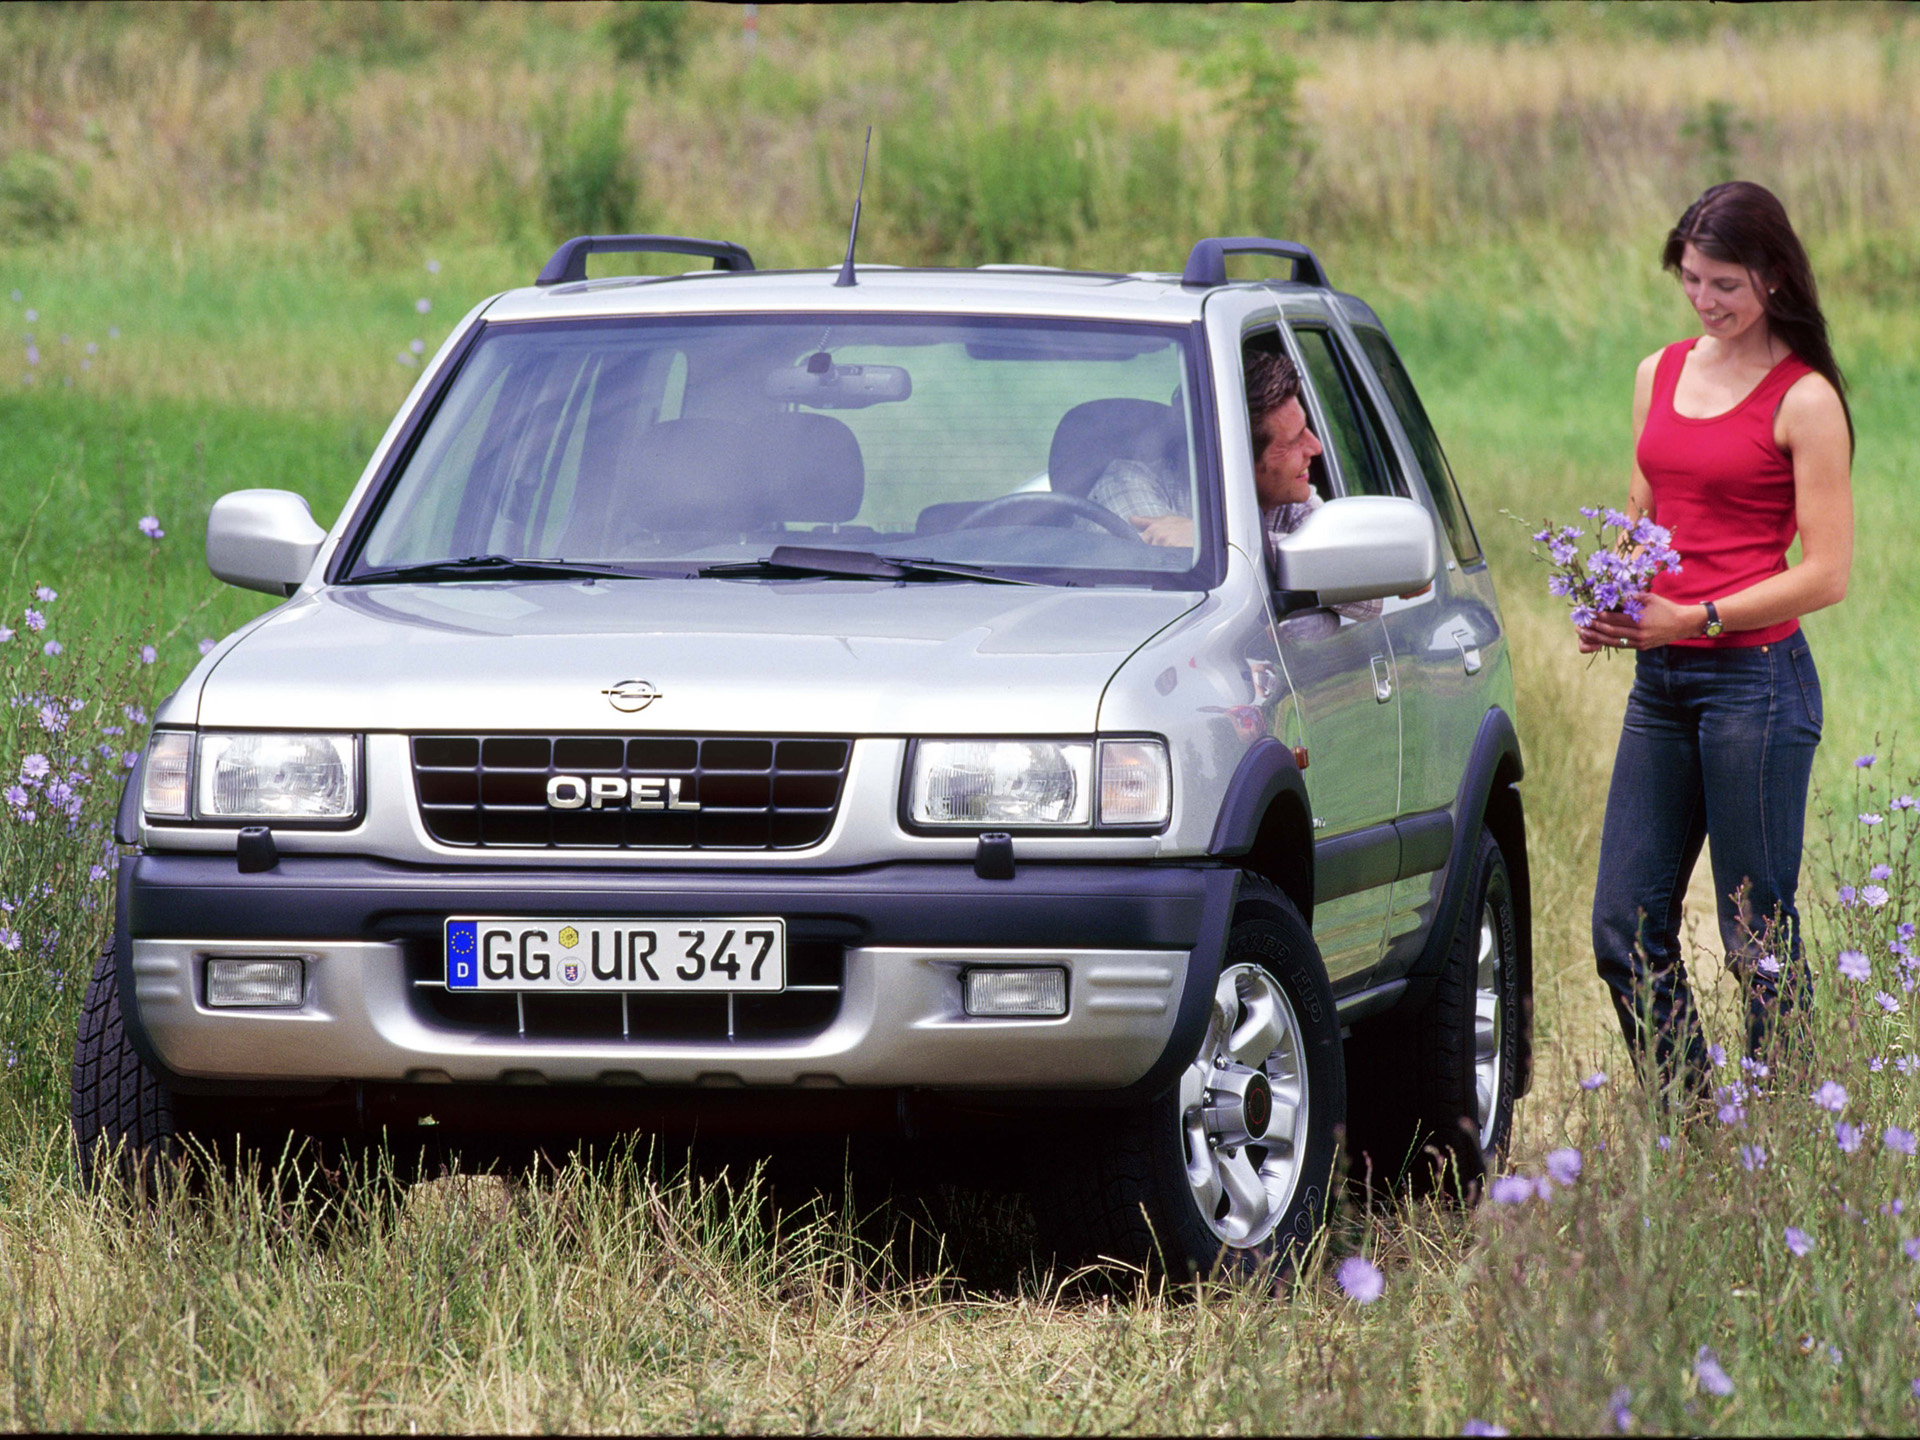 You can vote for this Opel Frontera photo